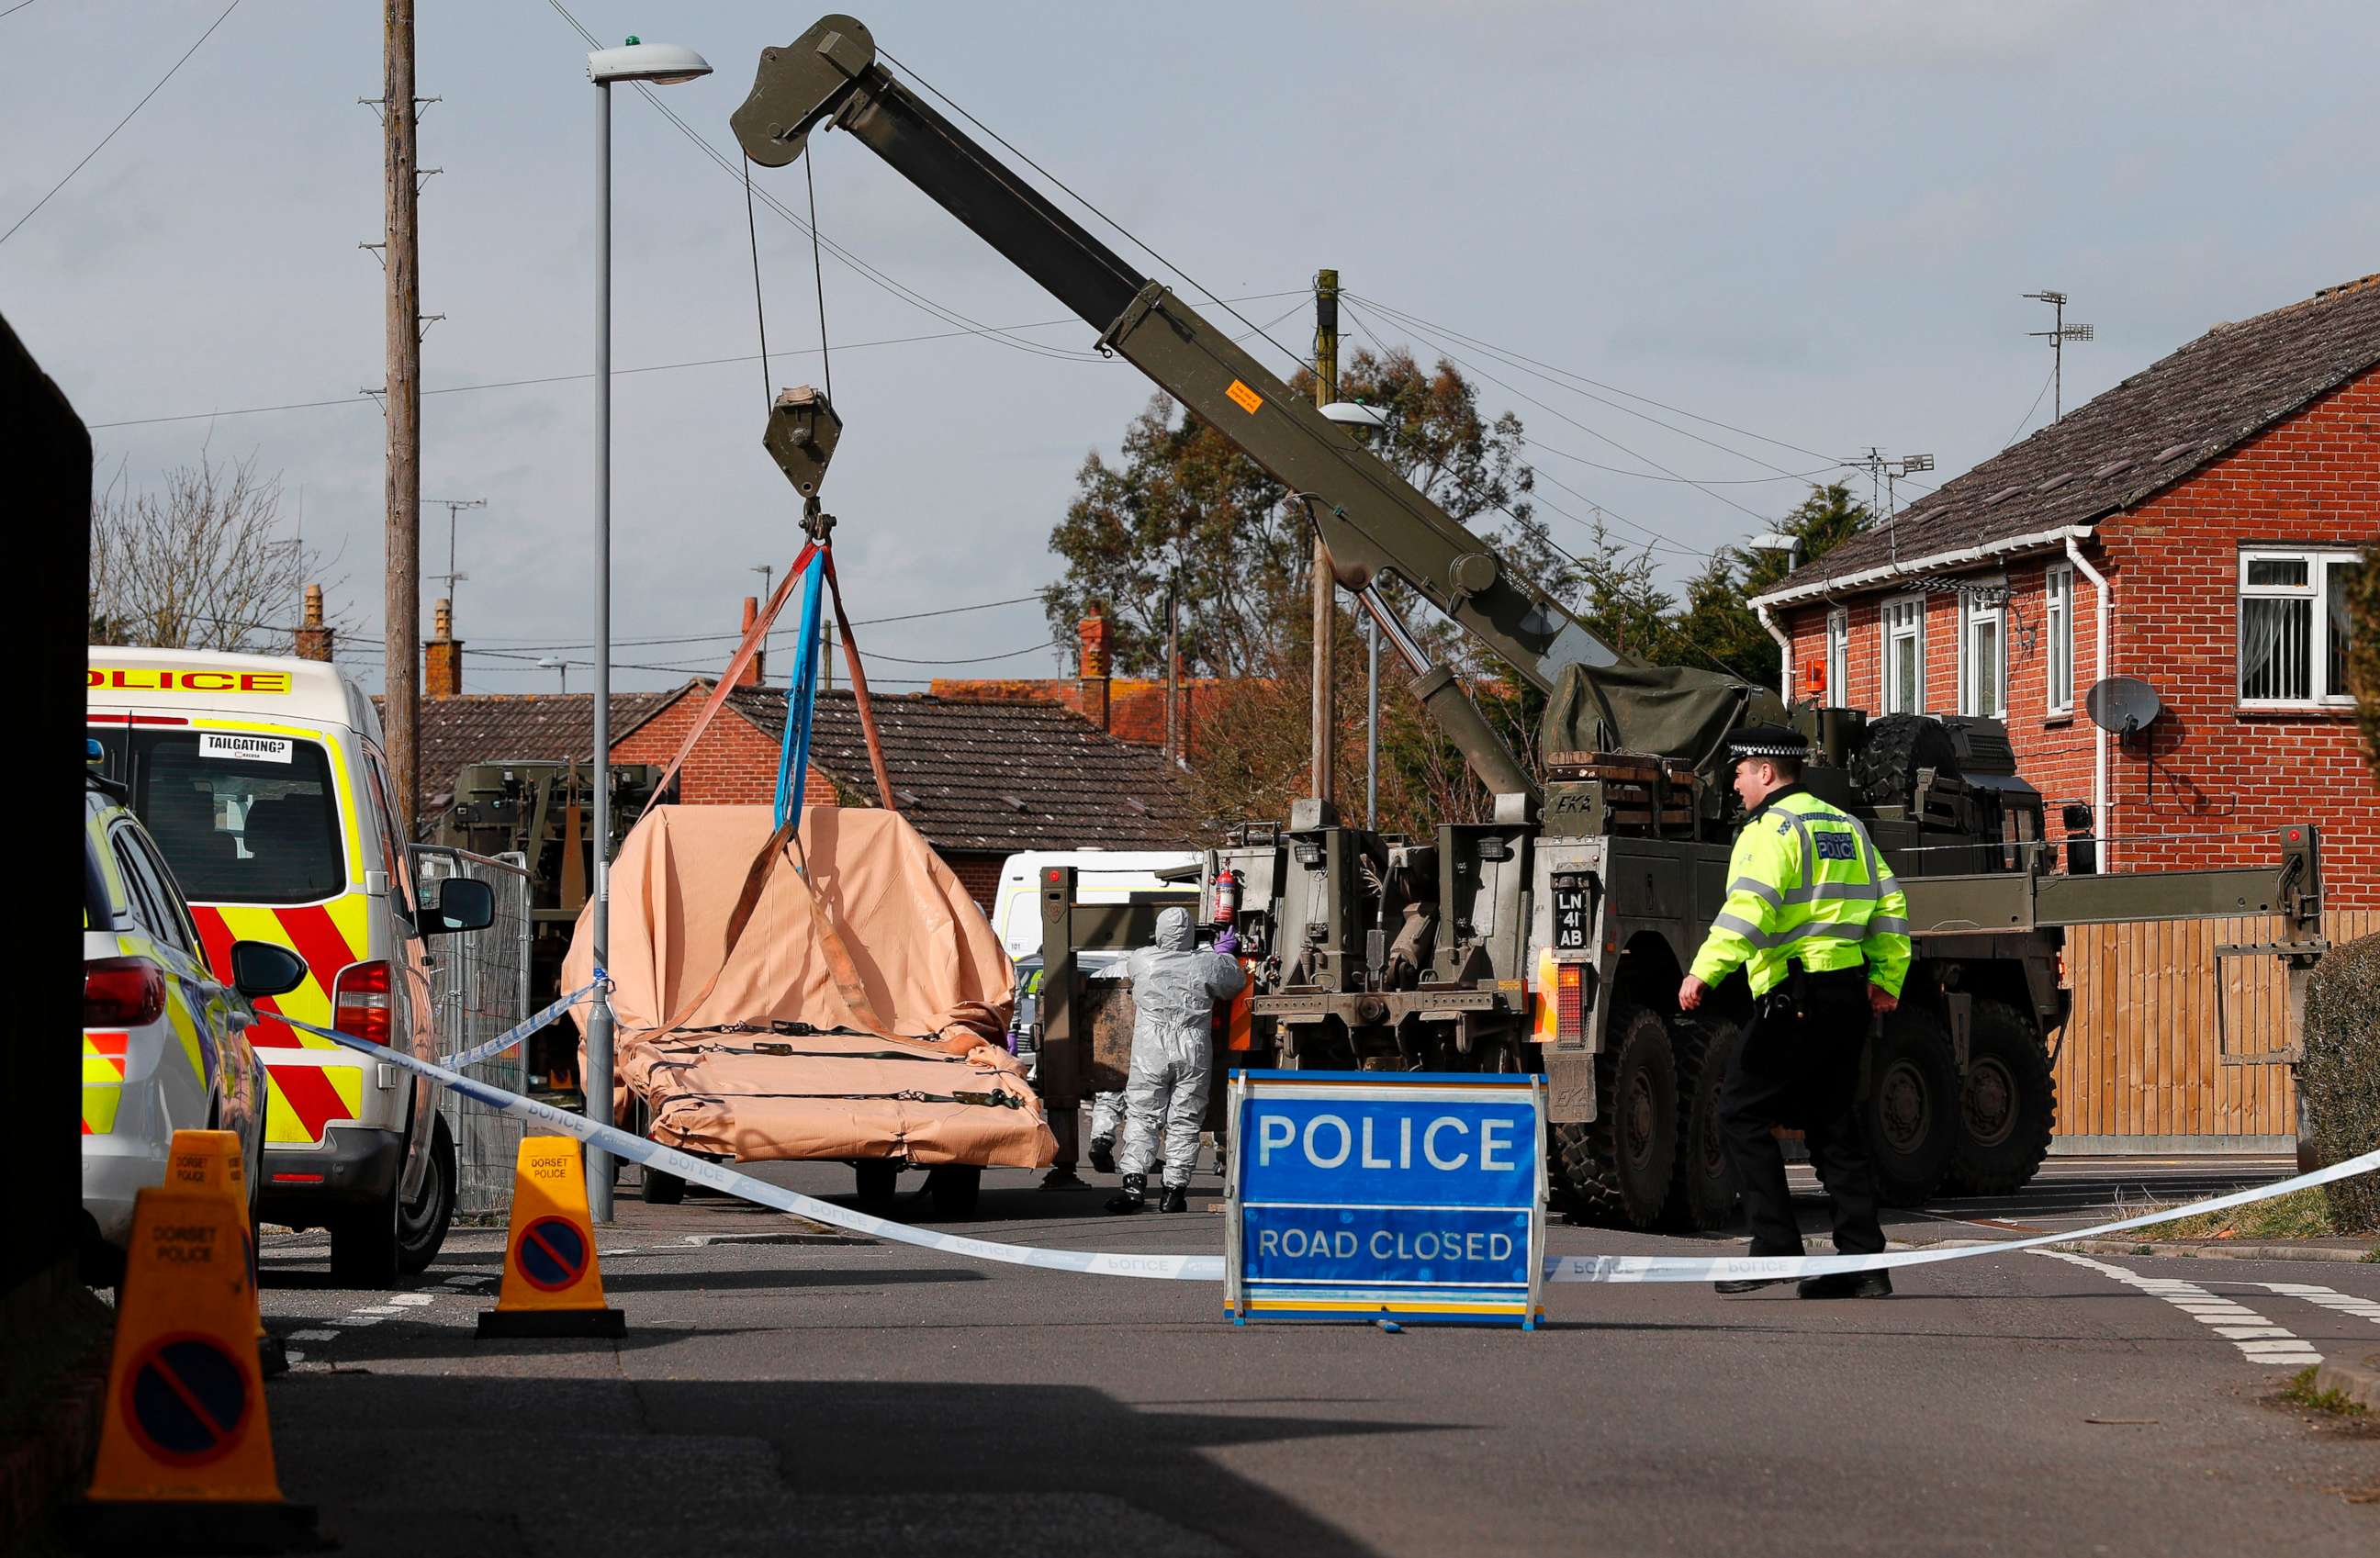 PHOTO: British Military personnel wearing protective coveralls work to remove a vehicle connected to the March 4 nerve agent attack in Salisbury, from a residential street in Gillingham, southeast England on March 14, 2018.
